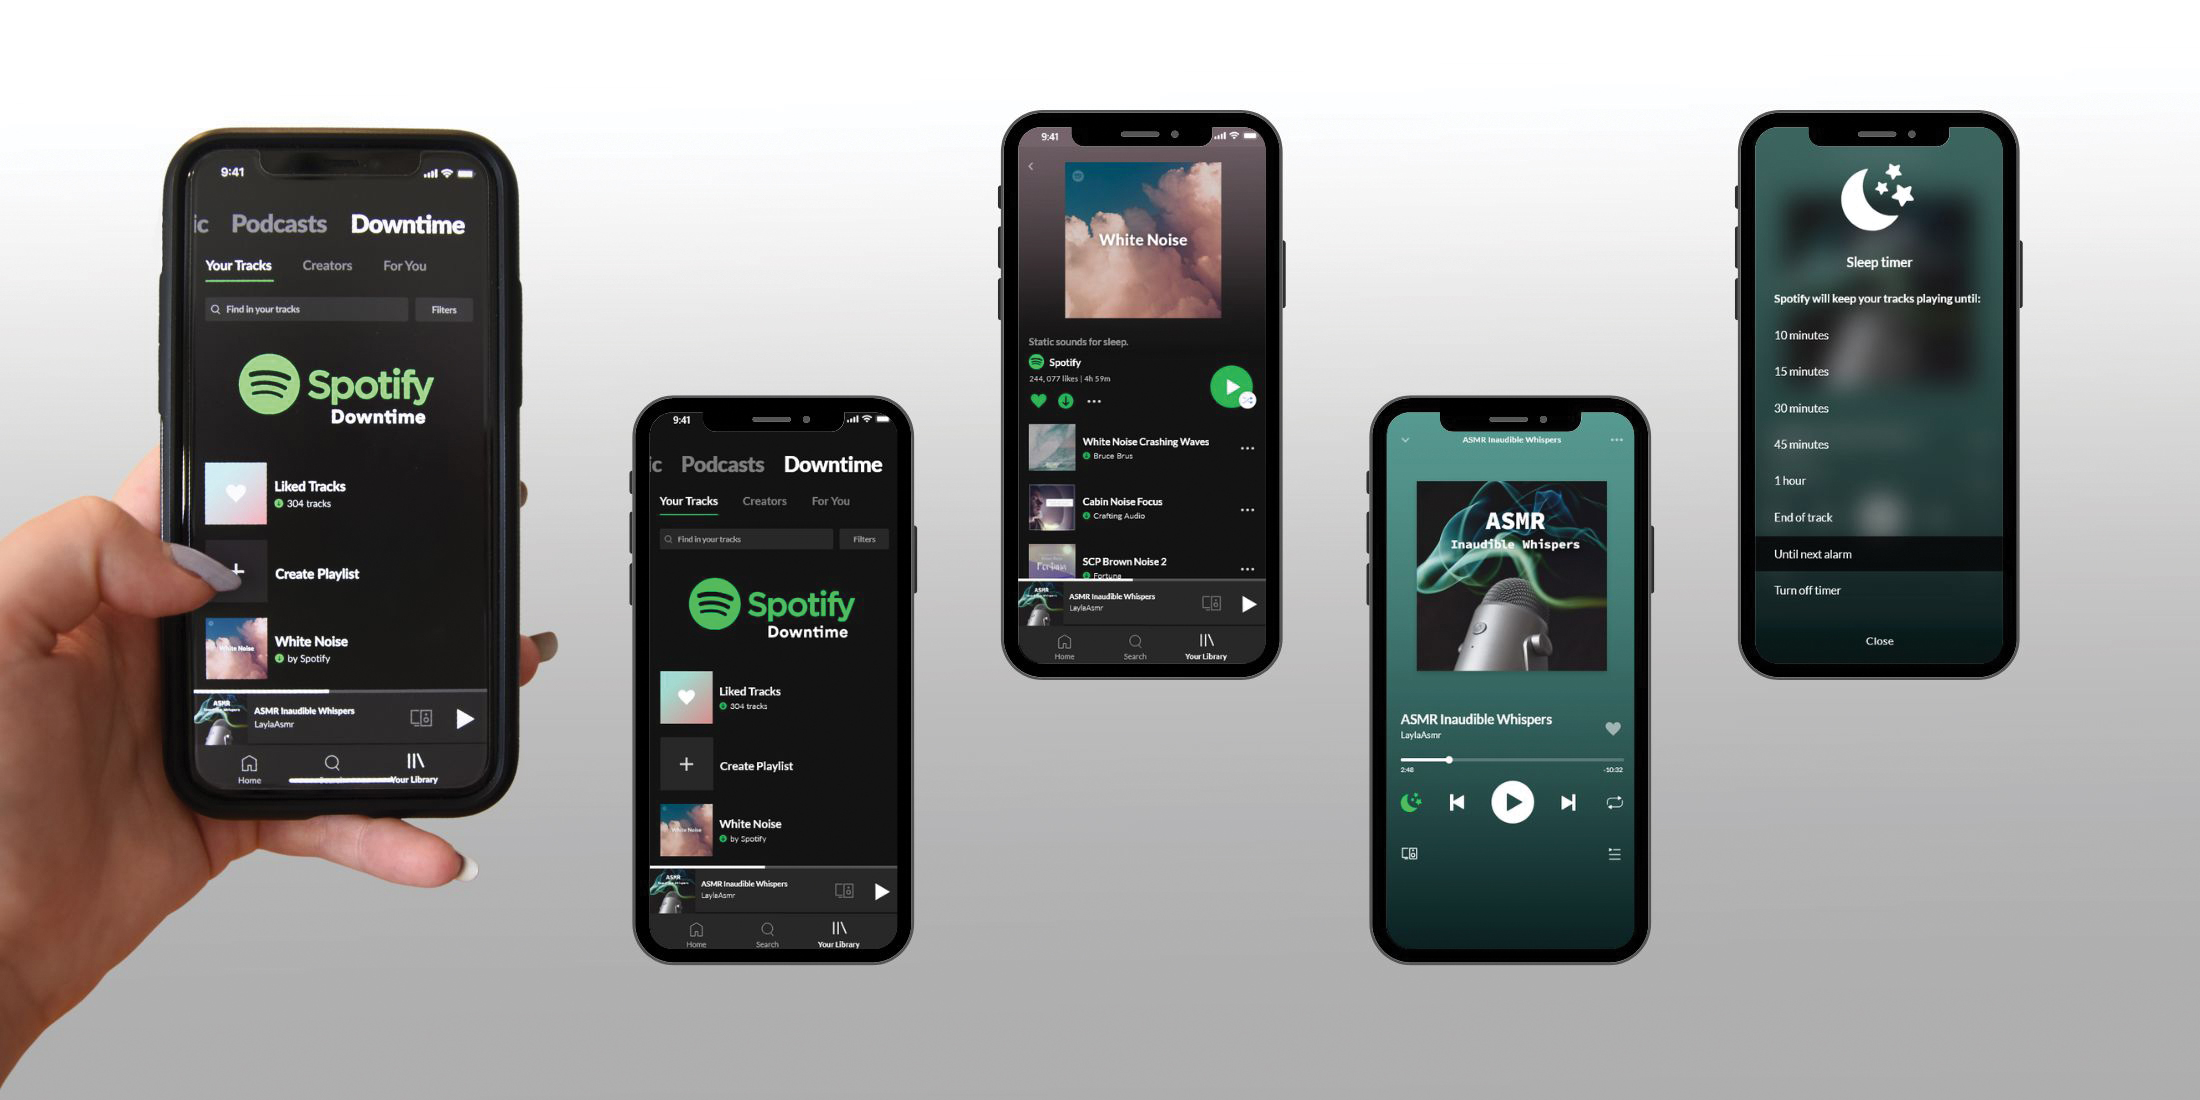 Spotify Downtime - Image 1